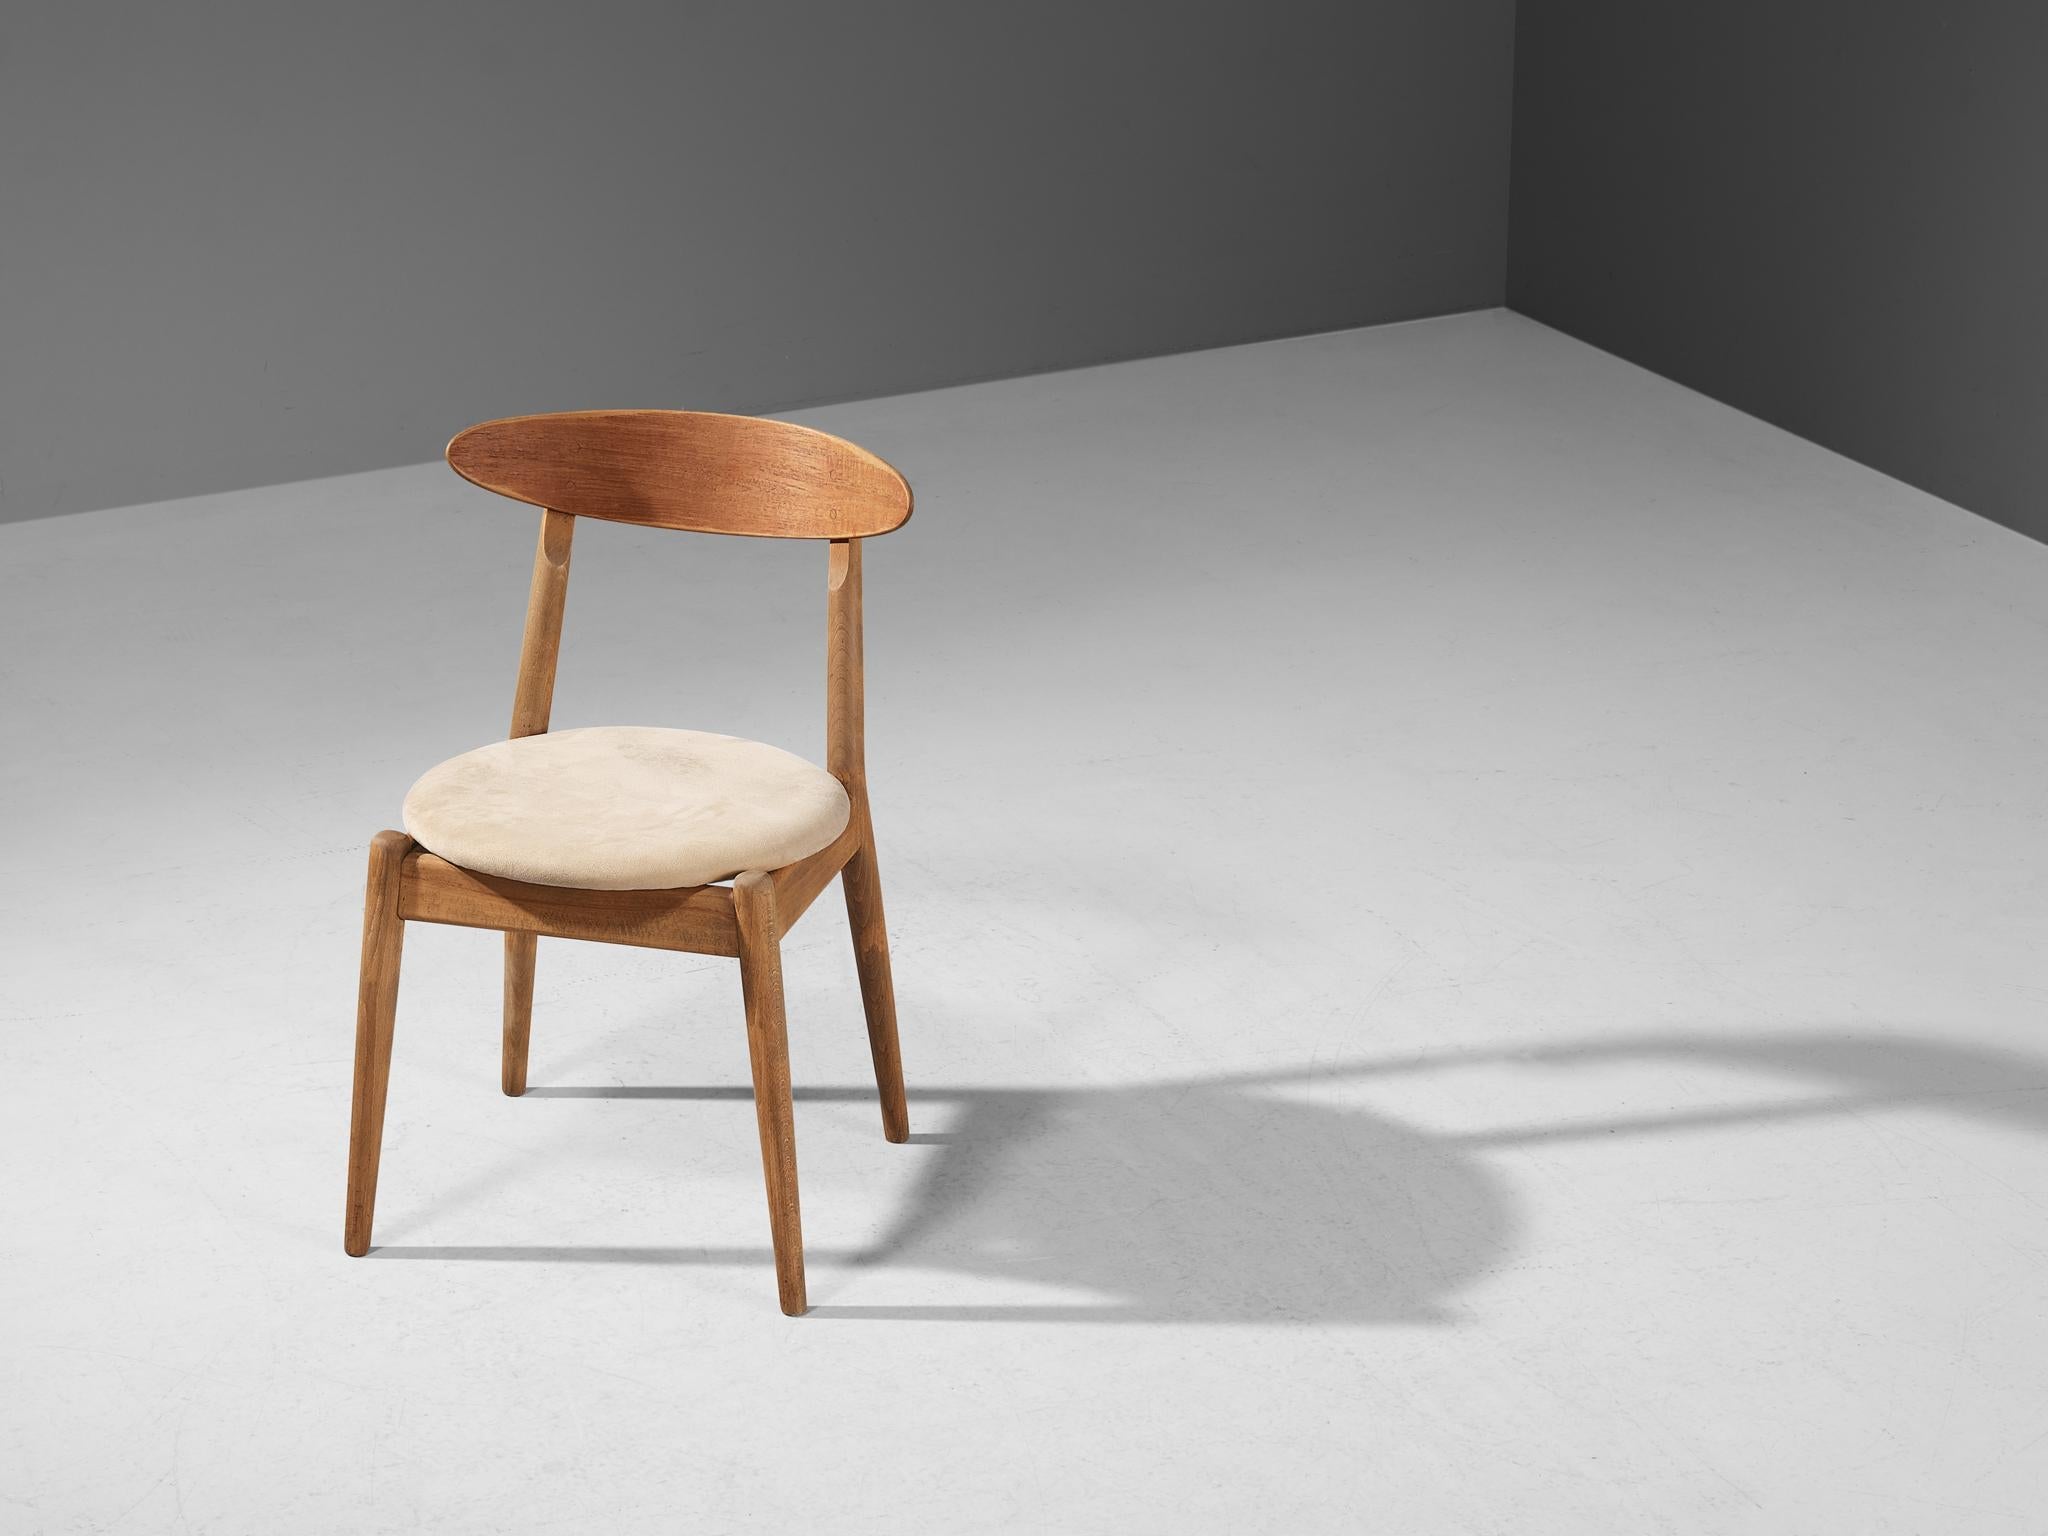 Jørgen Bo and Vilhelm Wohlert ‘Louisiana’ Dining Chair in Oak and Suede